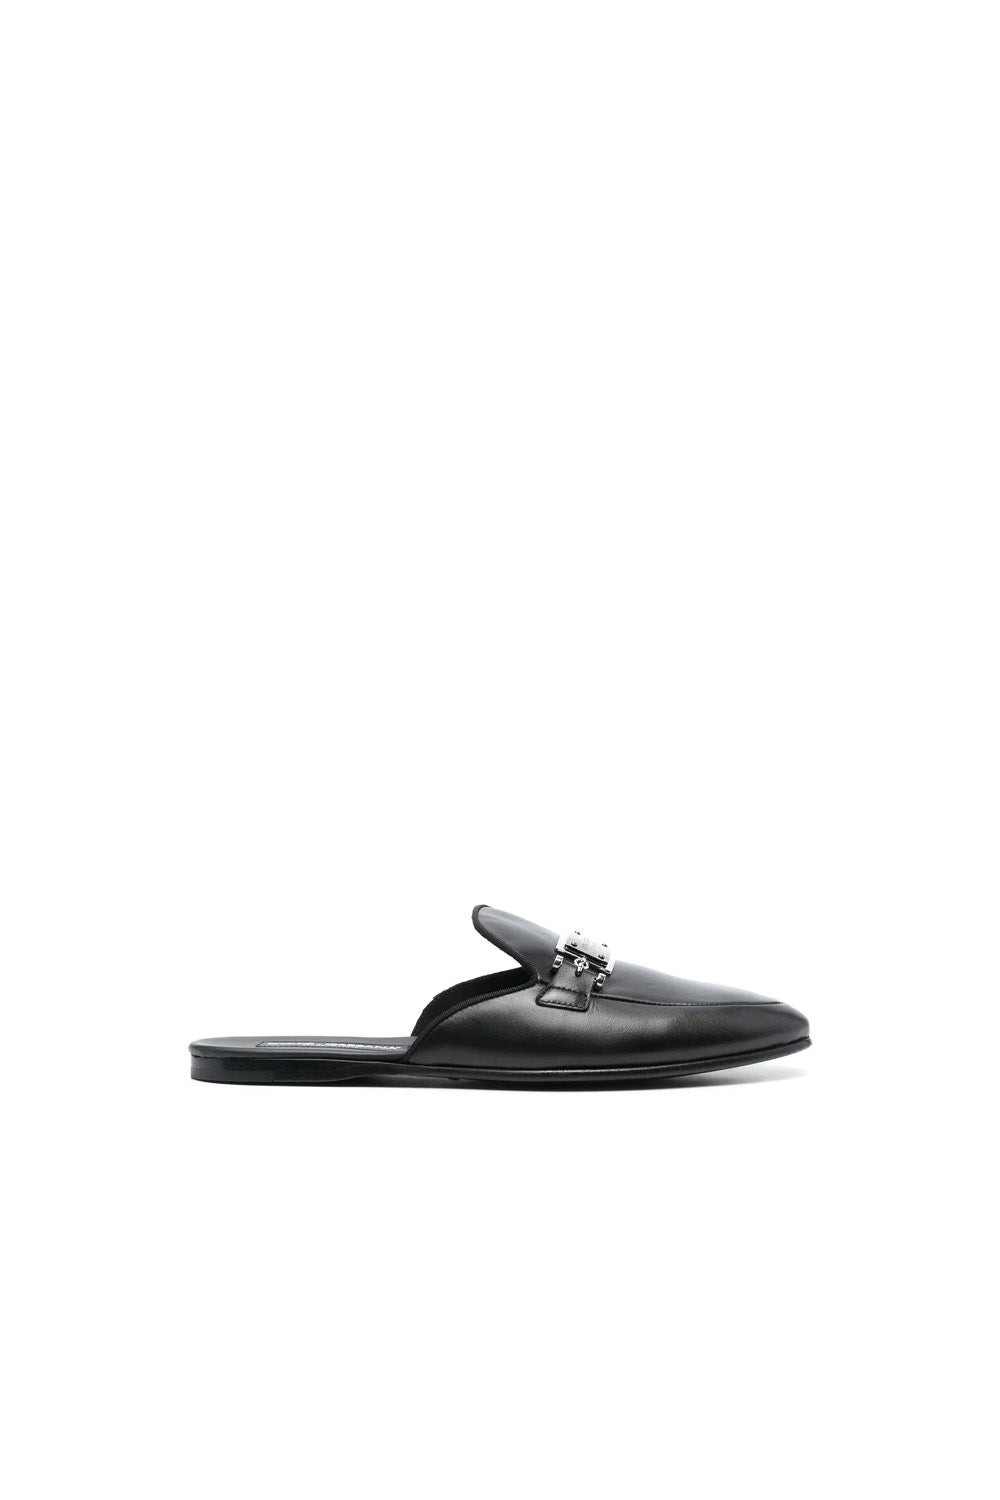 Dolce & Gabbana logo-plaque loafers